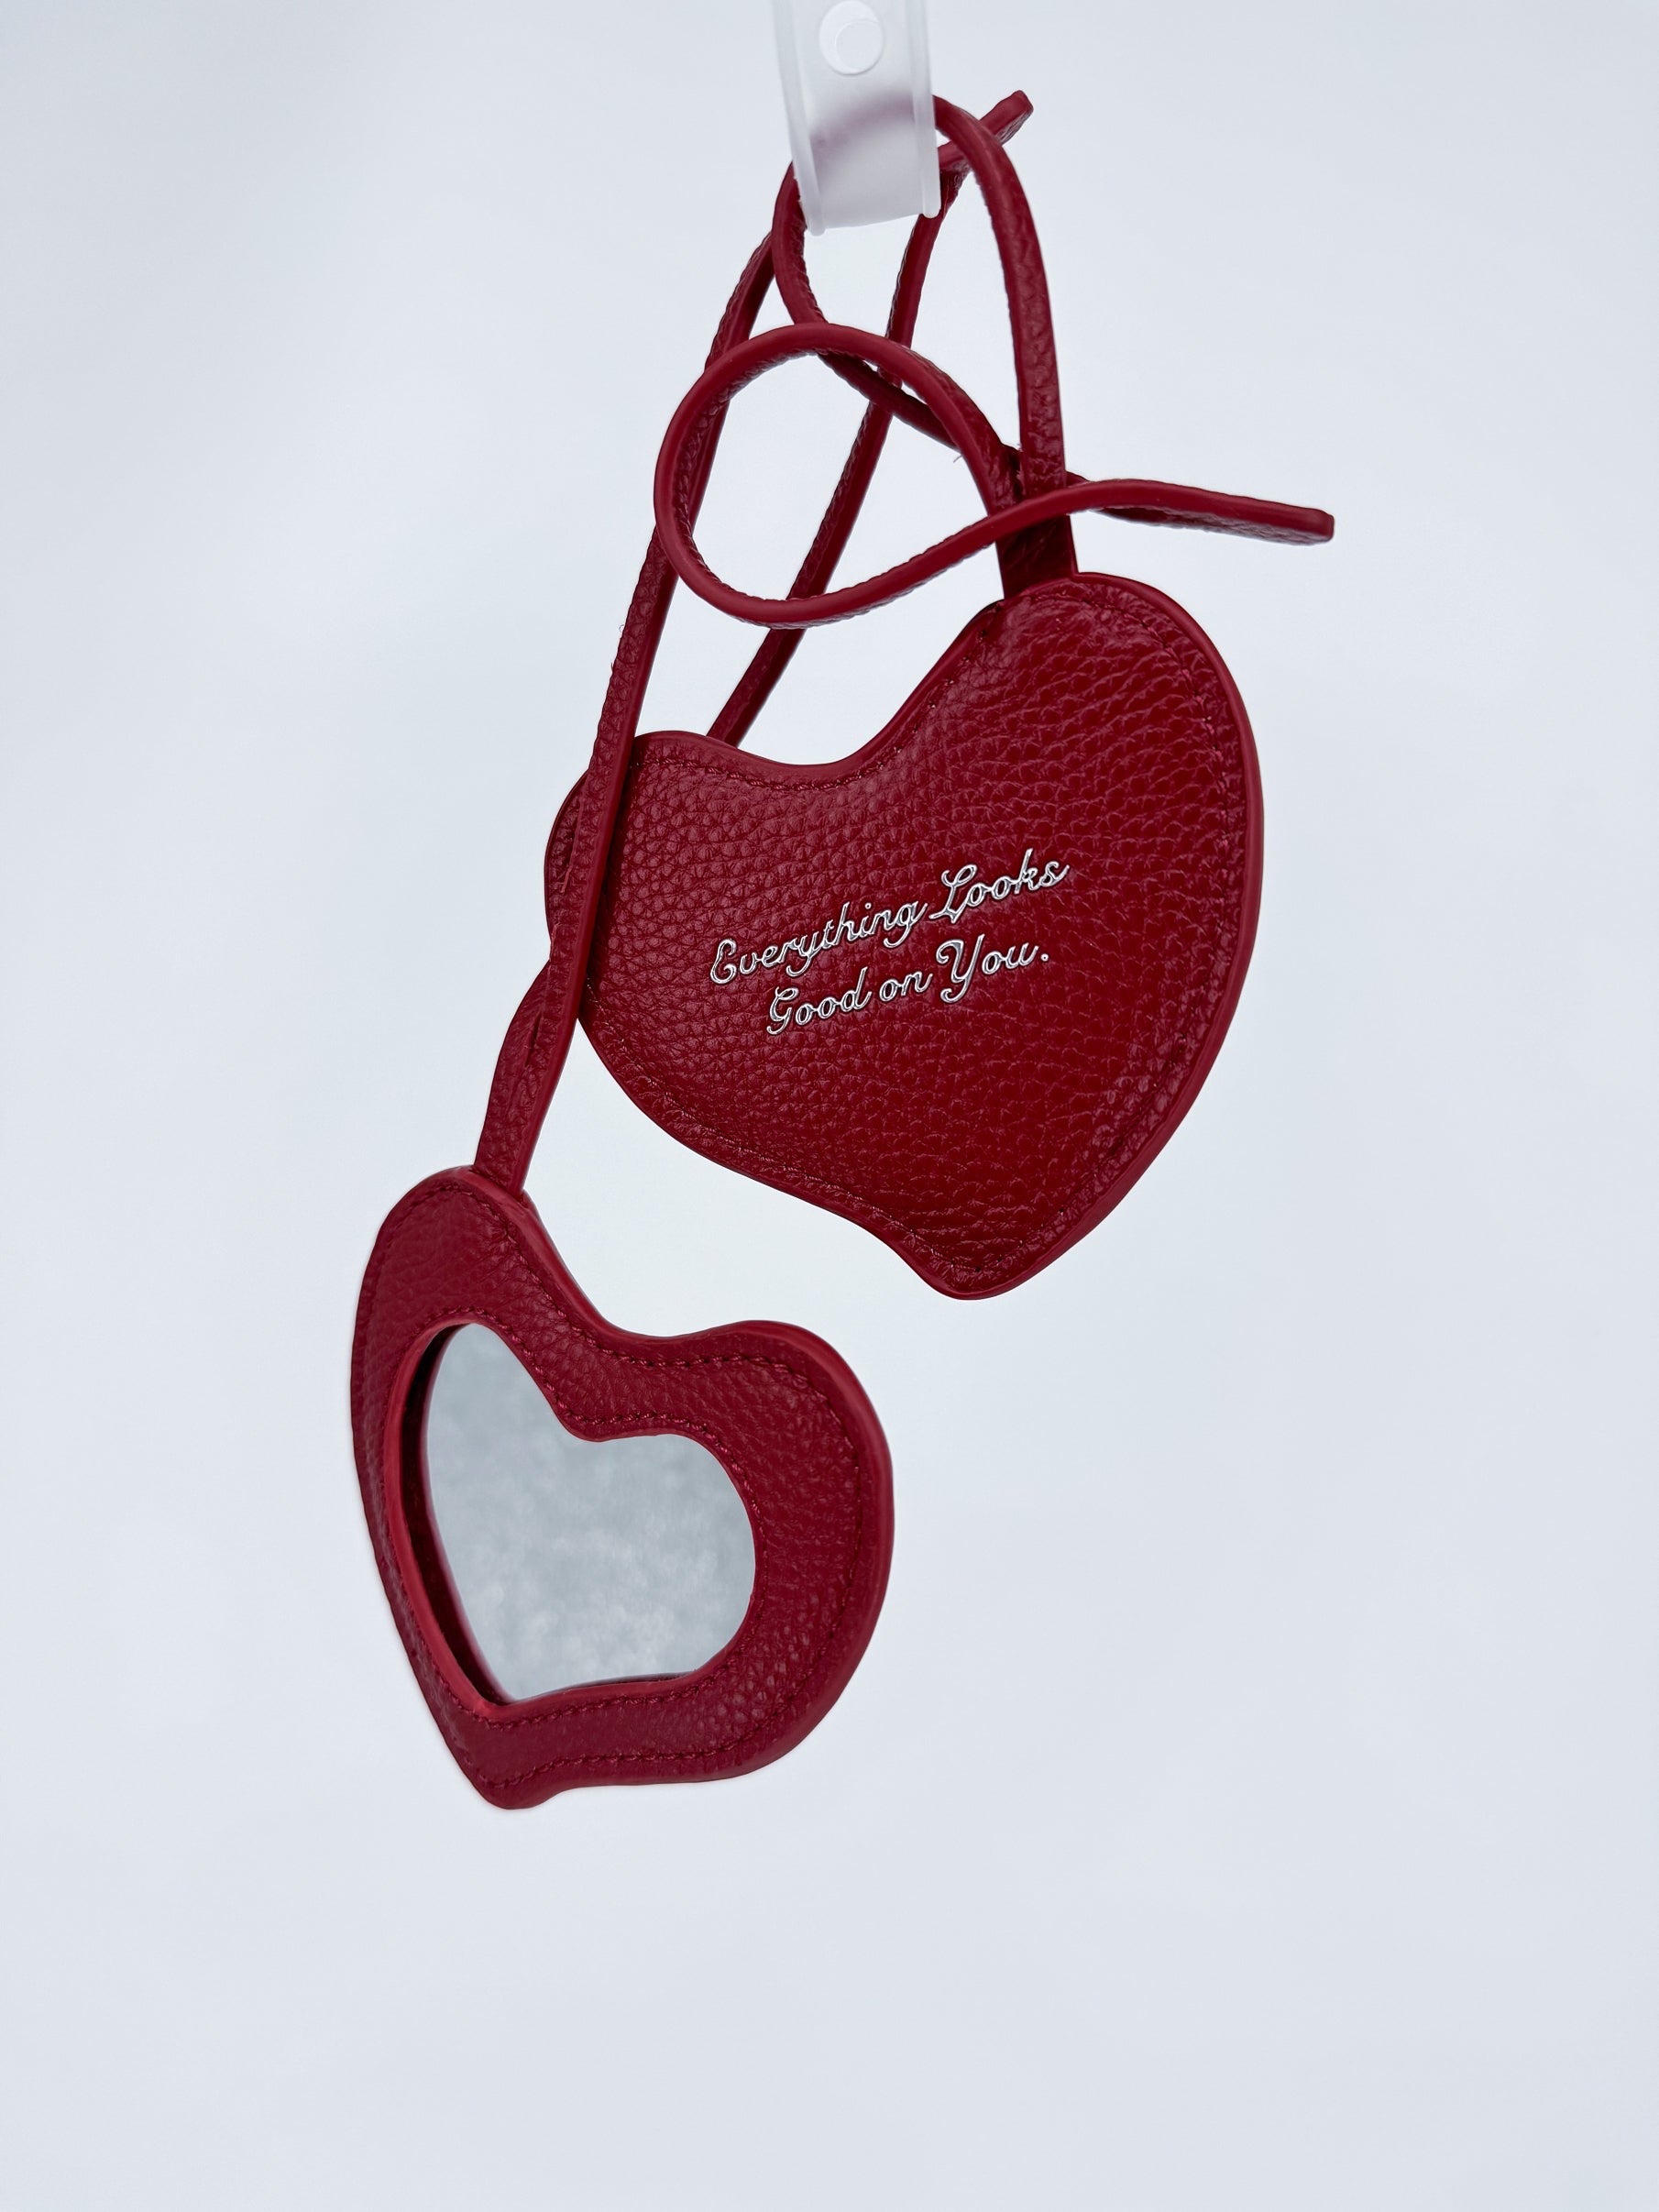 “Everything Looks Good on You” Leather Heart Mirror (RED)